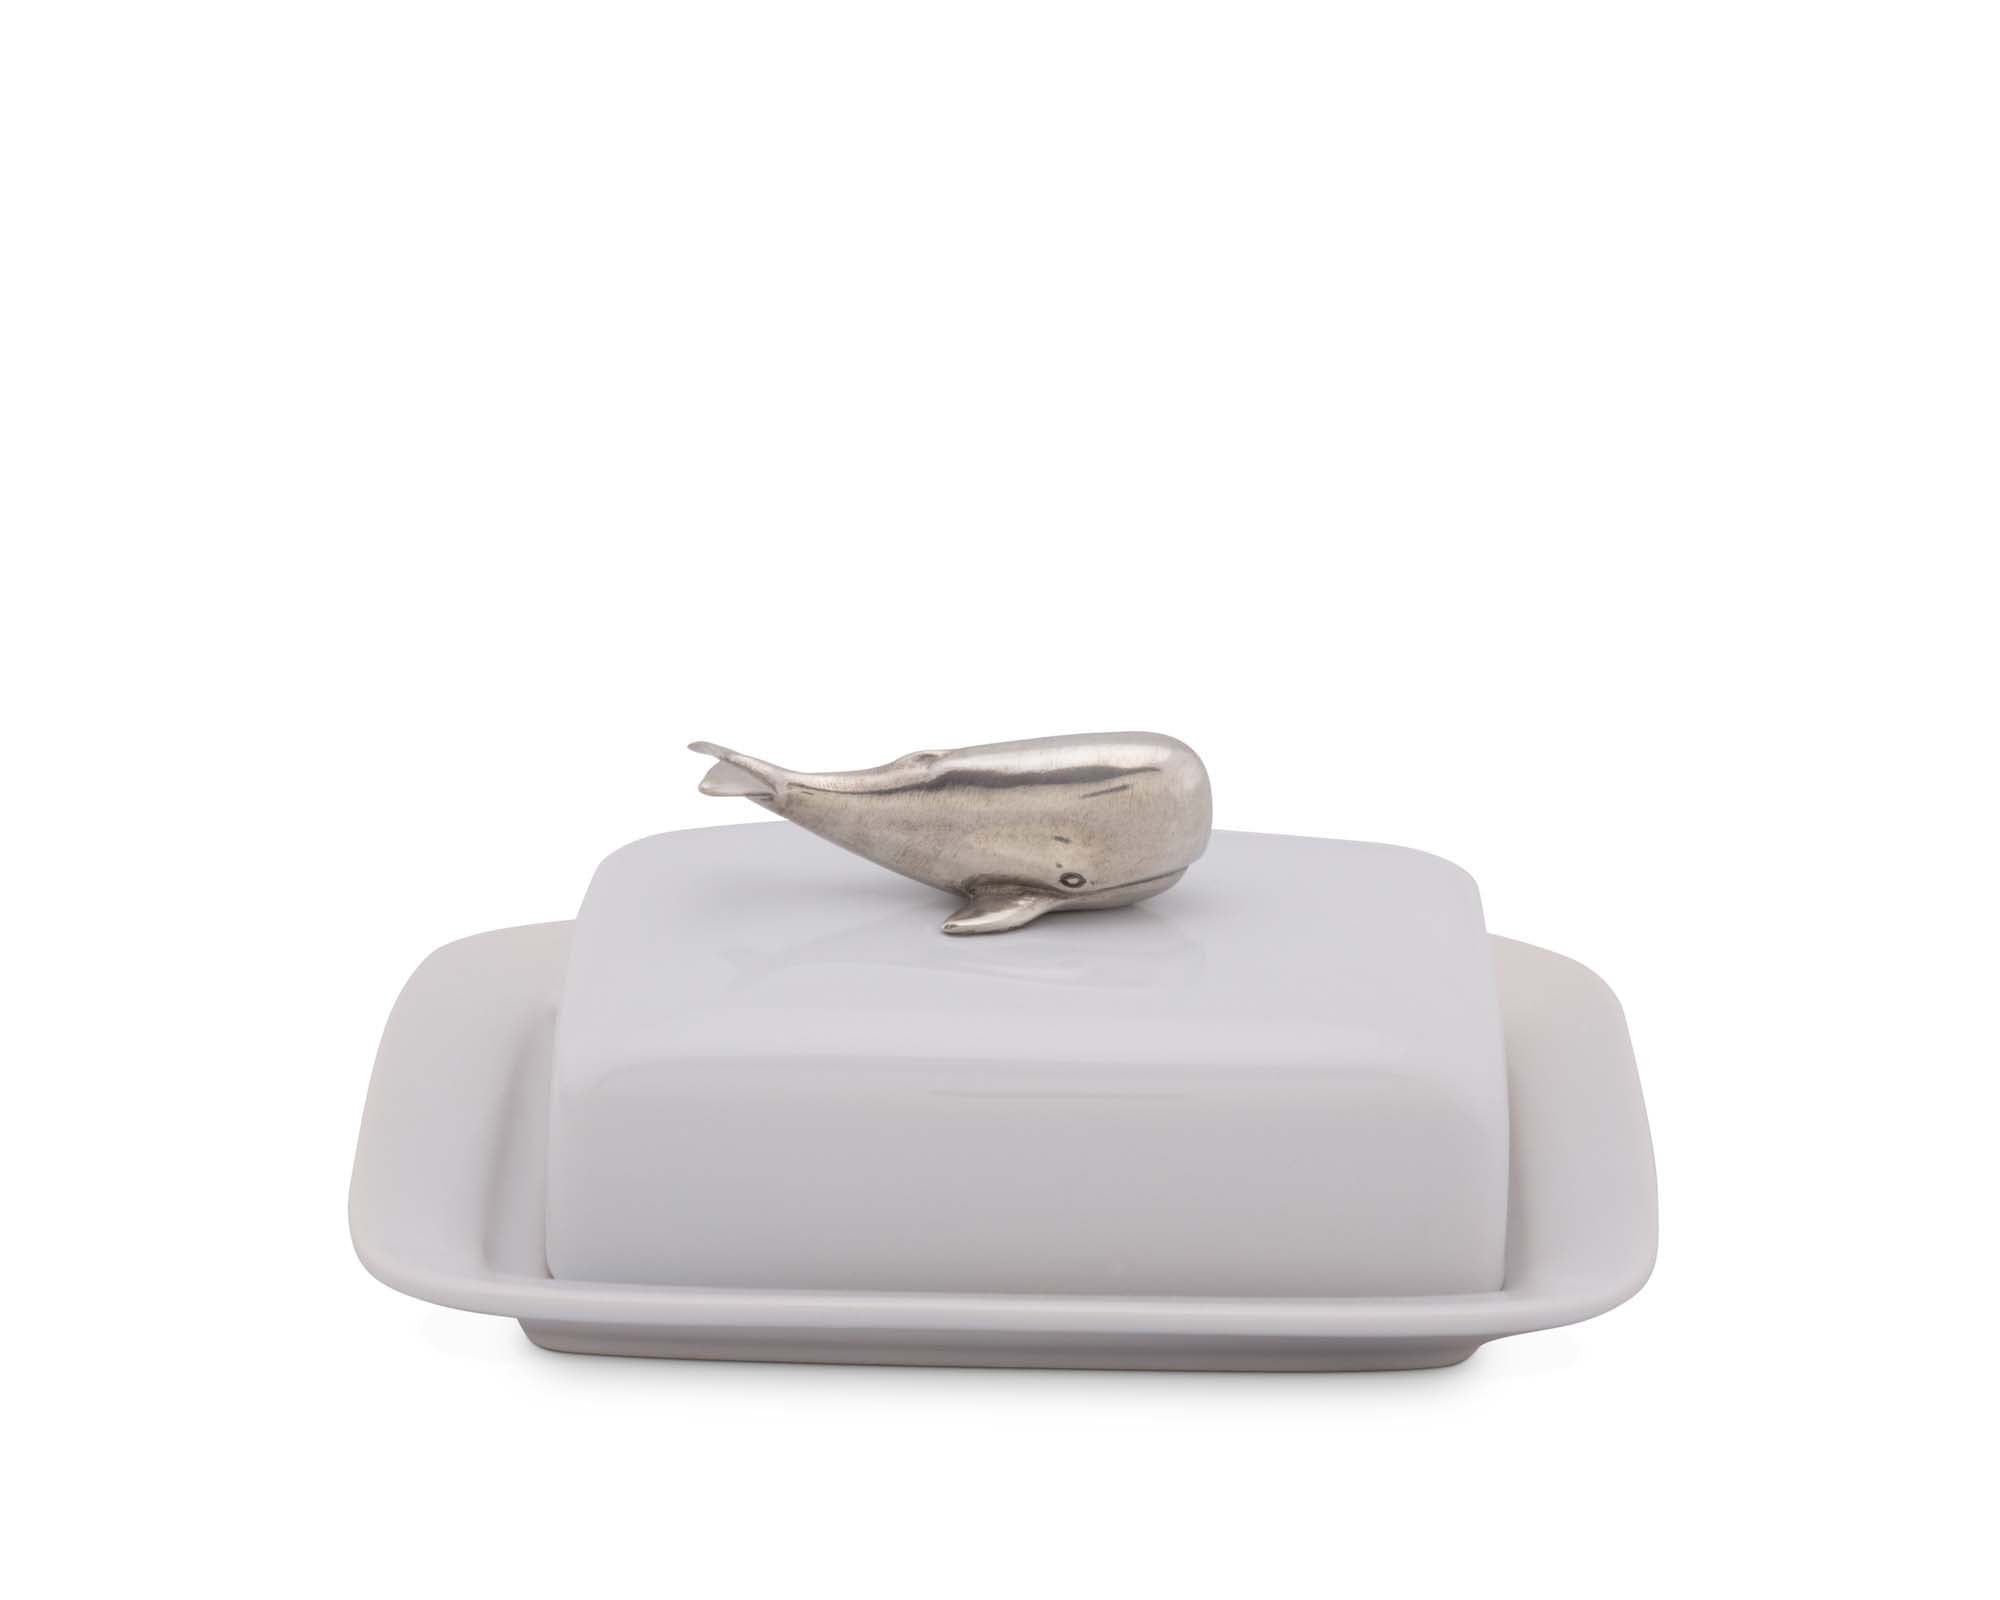 Vagabond House Whale Stoneware Butter dish Product Image